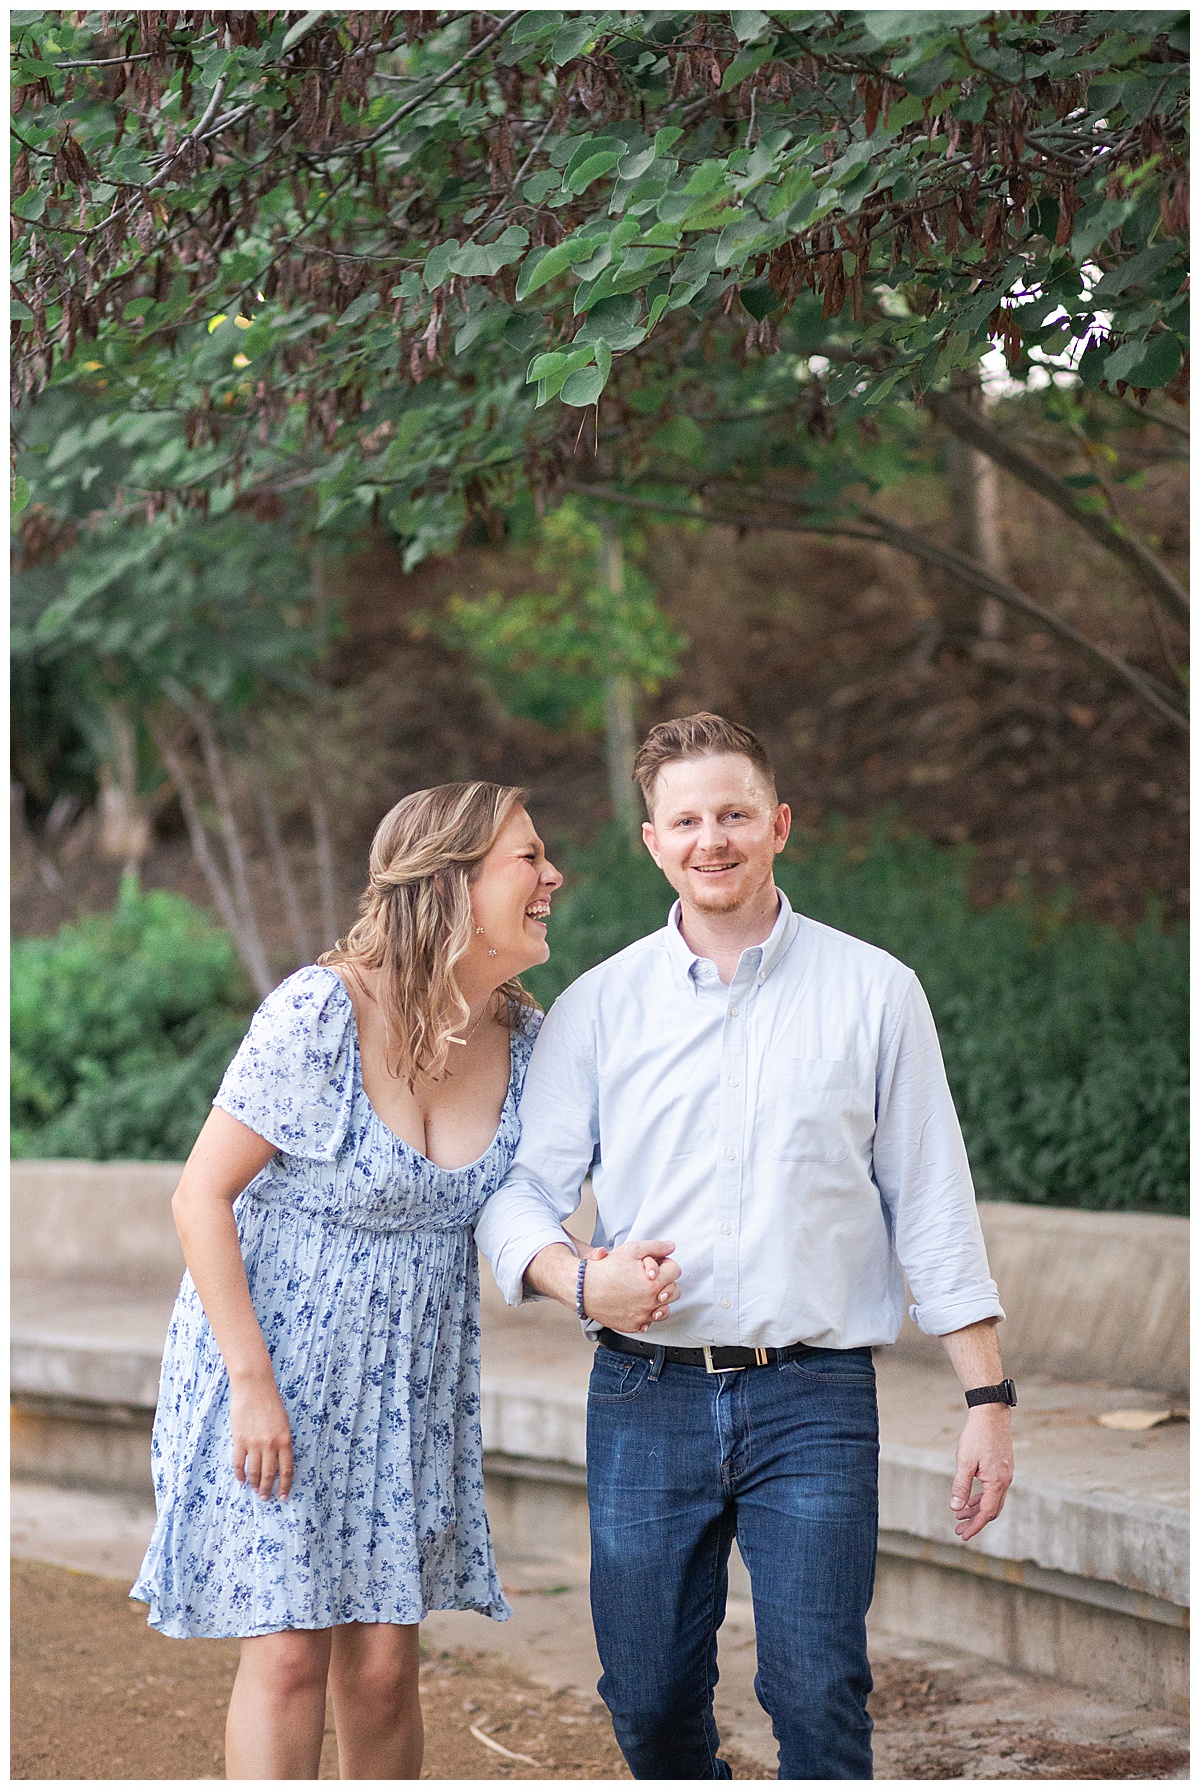 Woman smile and laughs with man for Houston's best engagement photographers